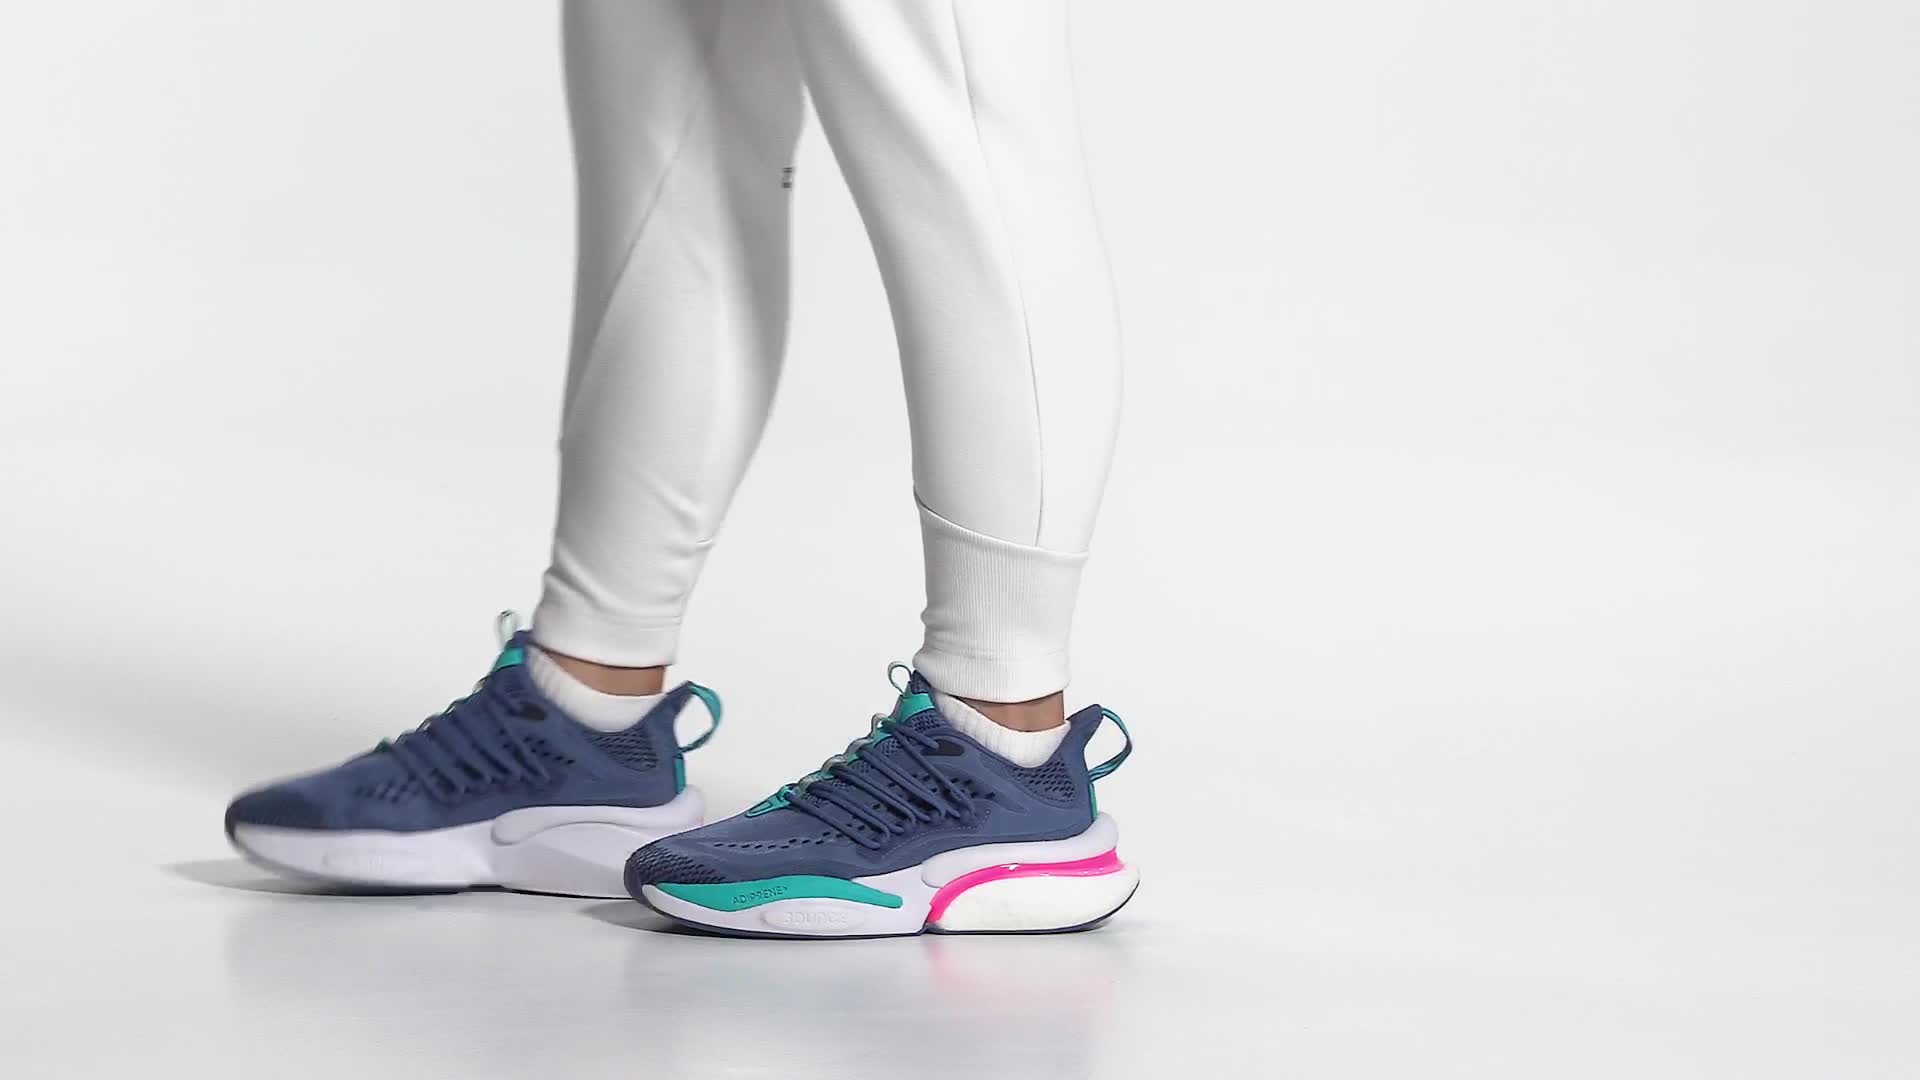 adidas Alphaboost V1 Shoes - Pink, Women's Lifestyle